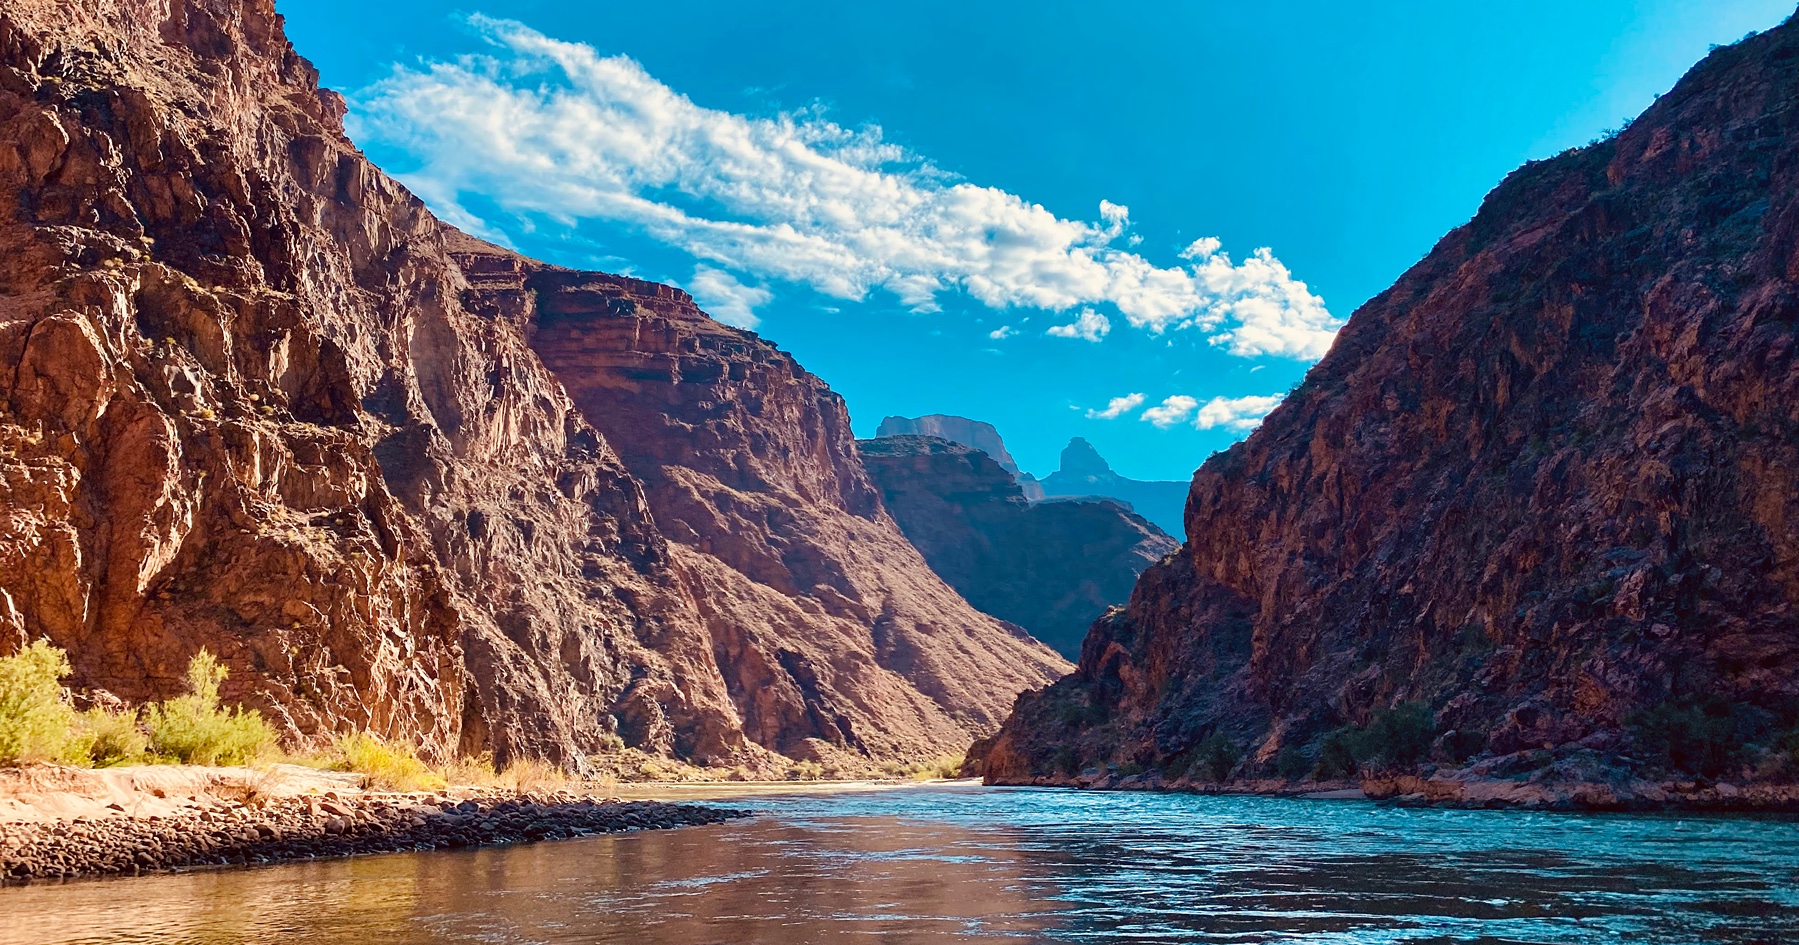 The base of the Grand Canyon at the Colorado River 